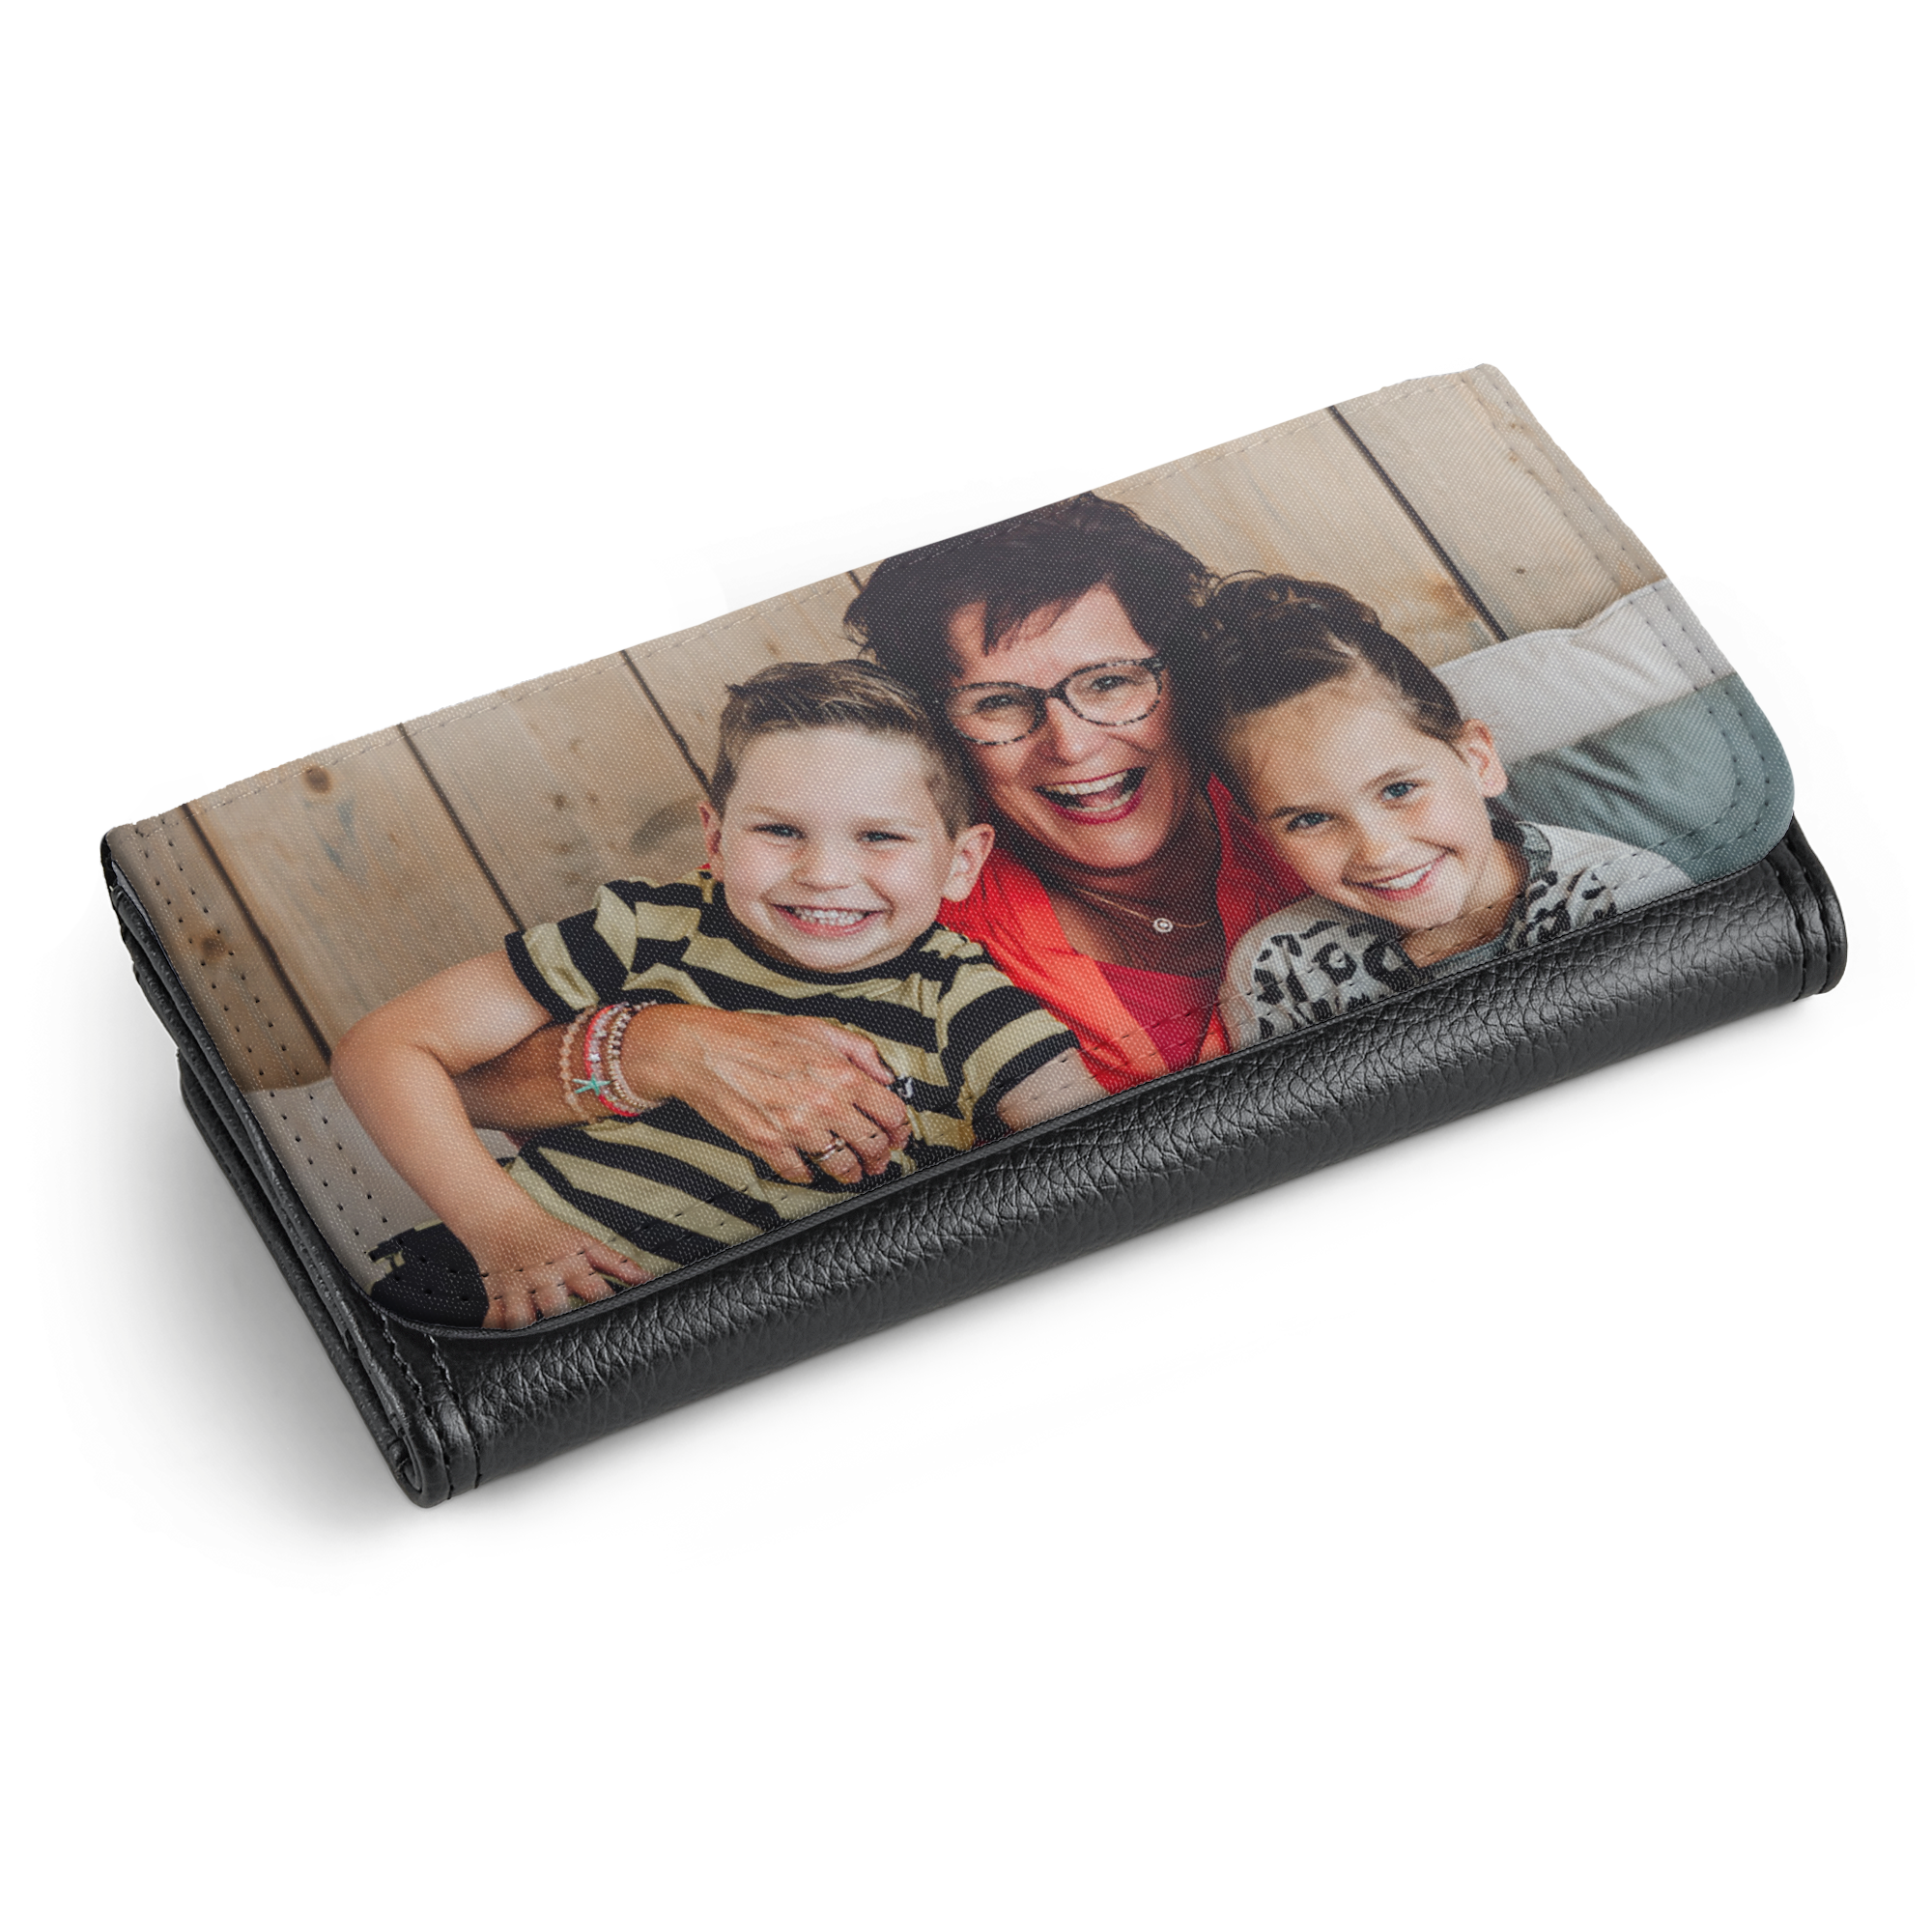 Personalised Make Up Bag | Clutch Bag | Pouch Bag | Gift Ideas for Her |  Custom Make-Up Bag | Birthday gift ideas for her |Womens Gift ideas |  Unique gifts for fashion and home.